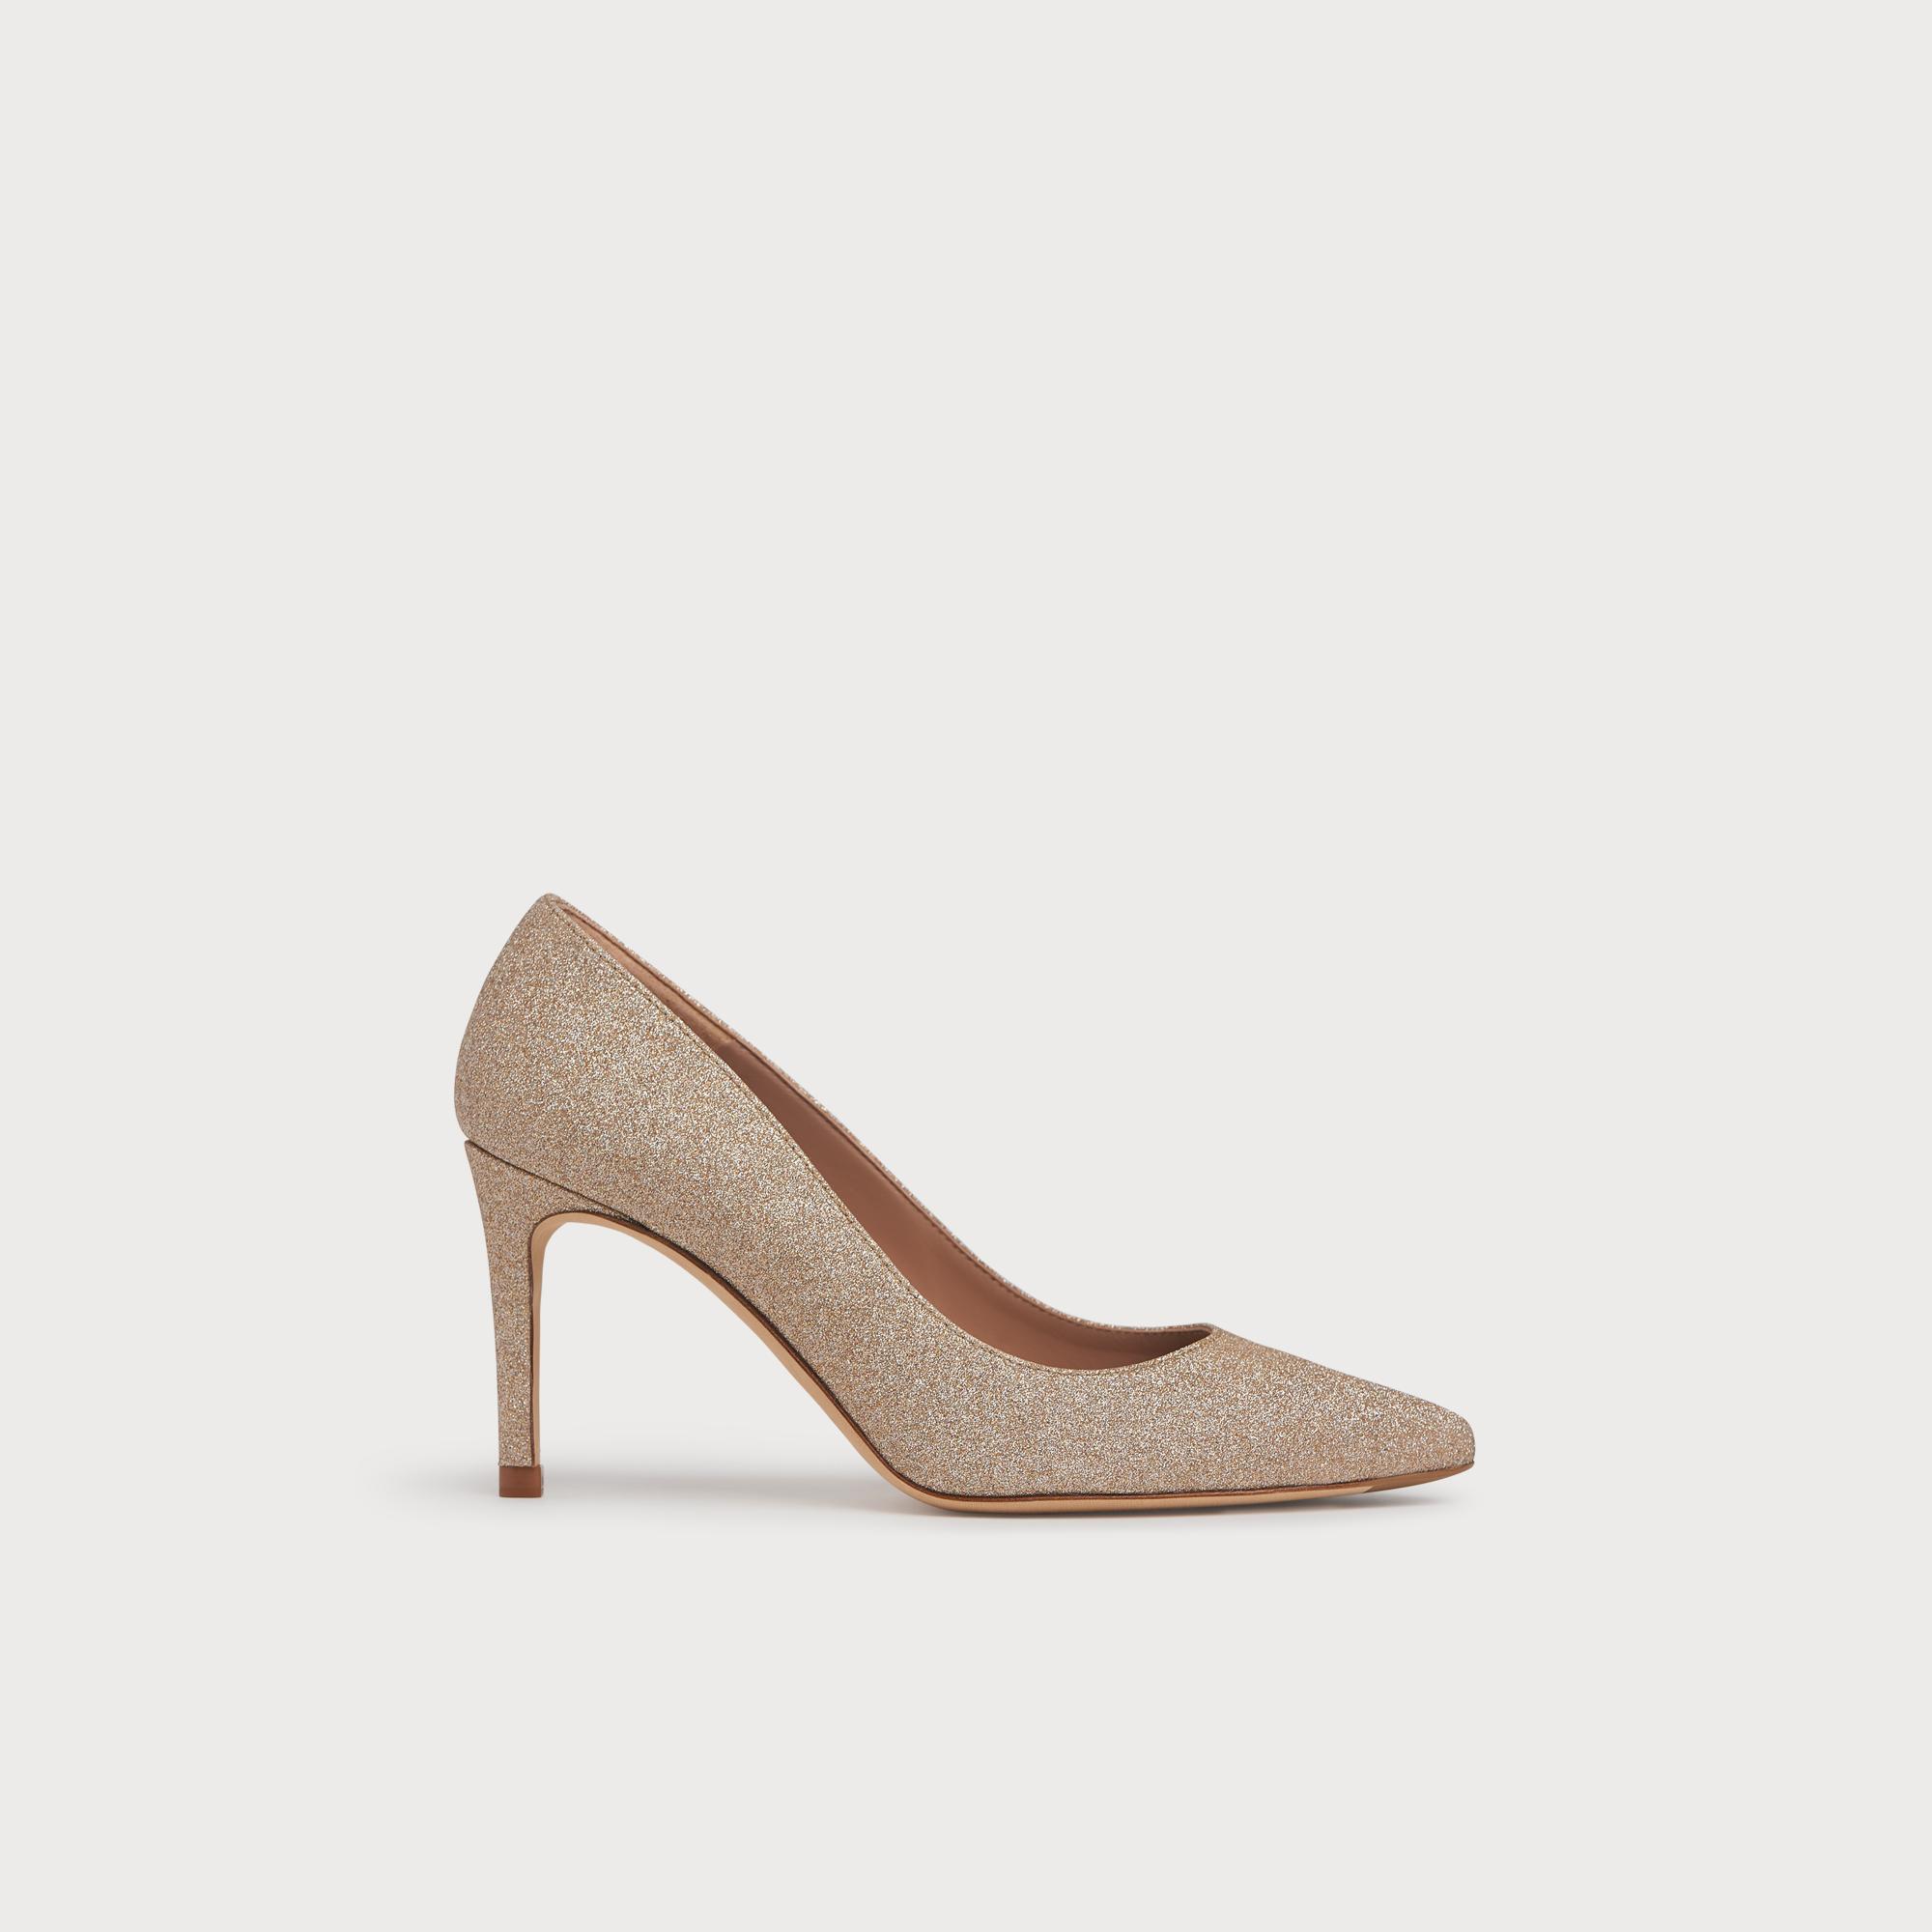 champagne coloured court shoes